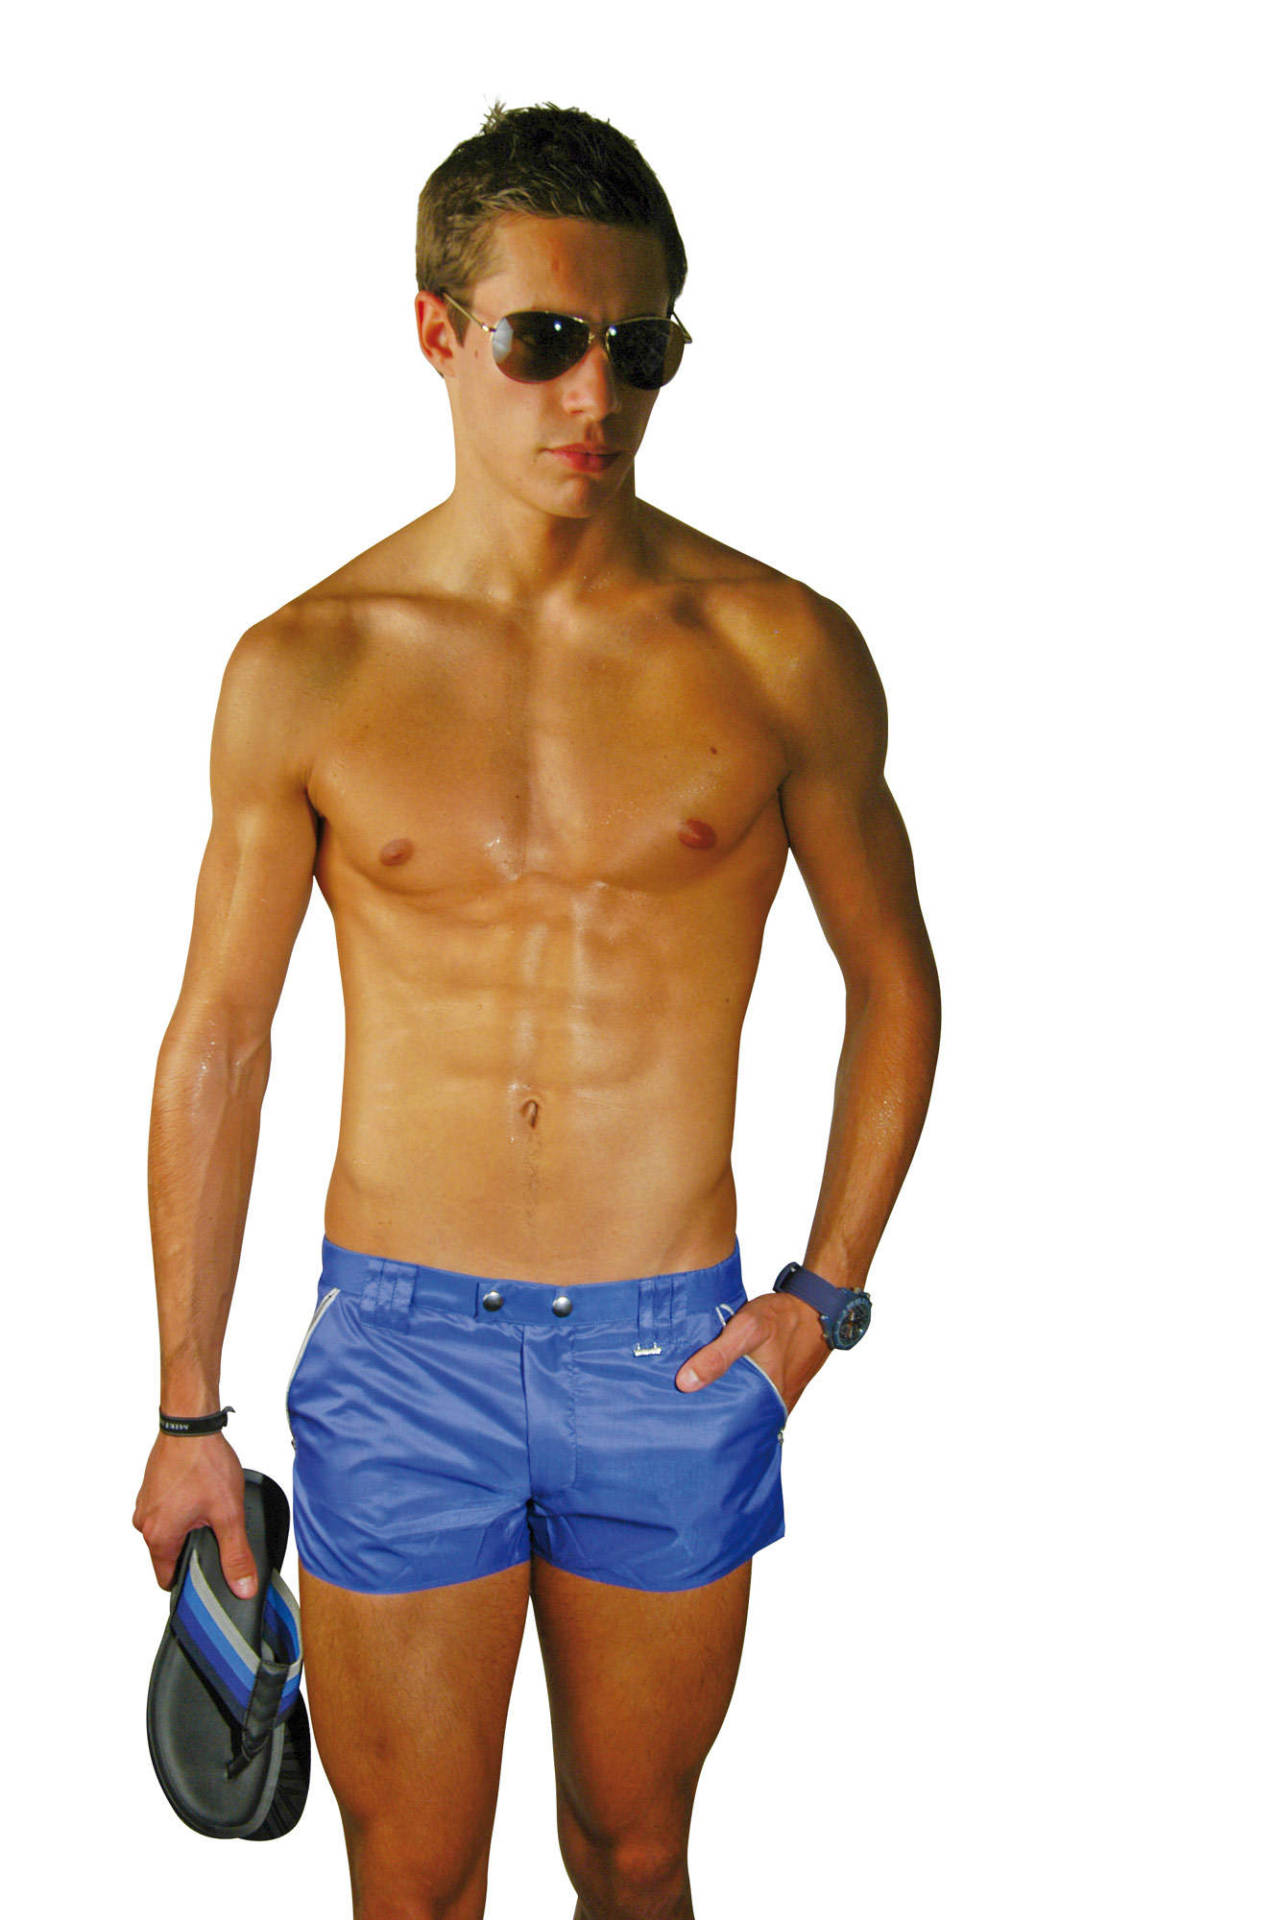 81.Â  Hot shorts from Sweetman, a french company.Â  Unfortunately, they&rsquo;re